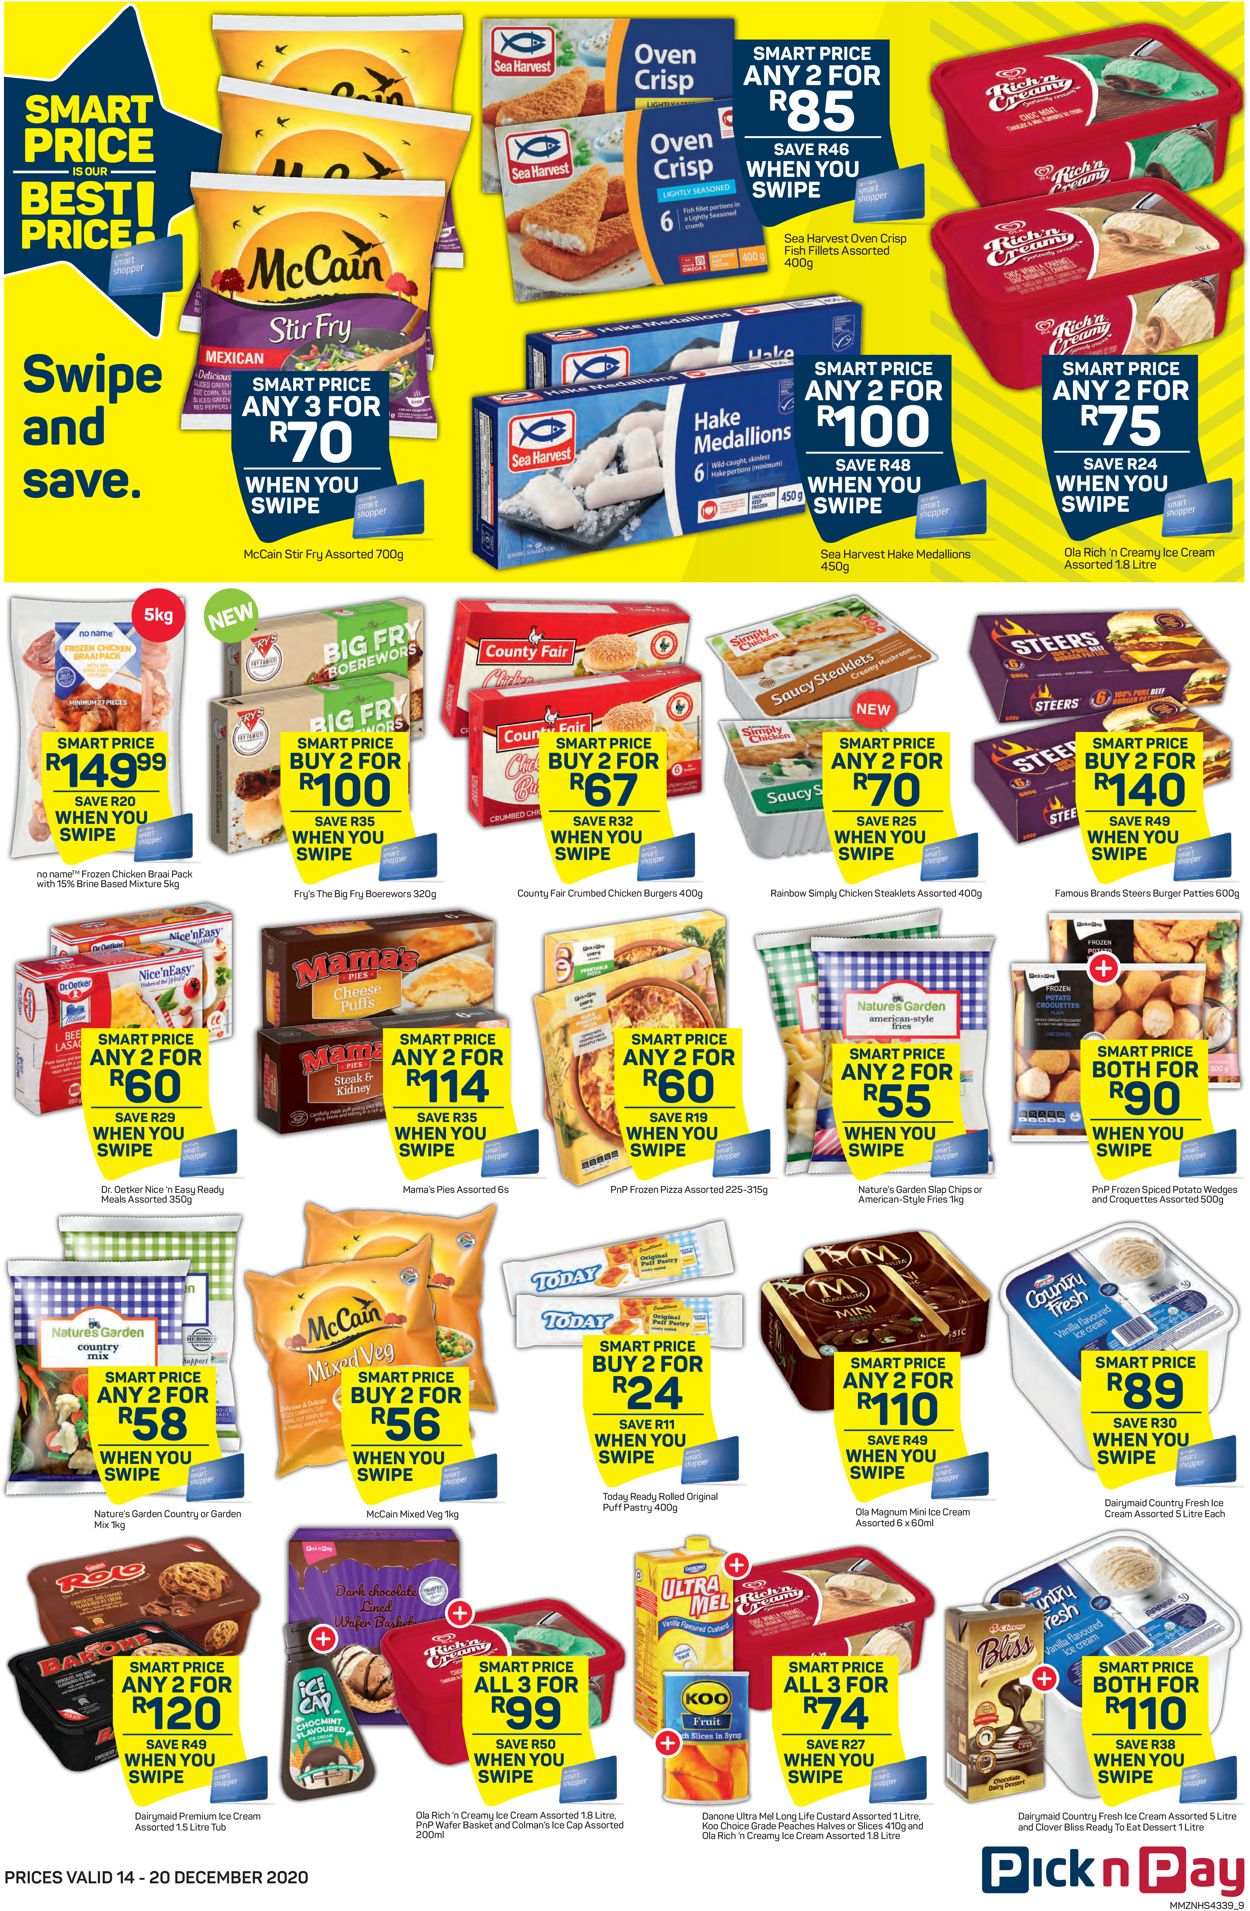 Pick n Pay Countdown 2020 Catalogue - 2020/12/14-2020/12/20 (Page 9)